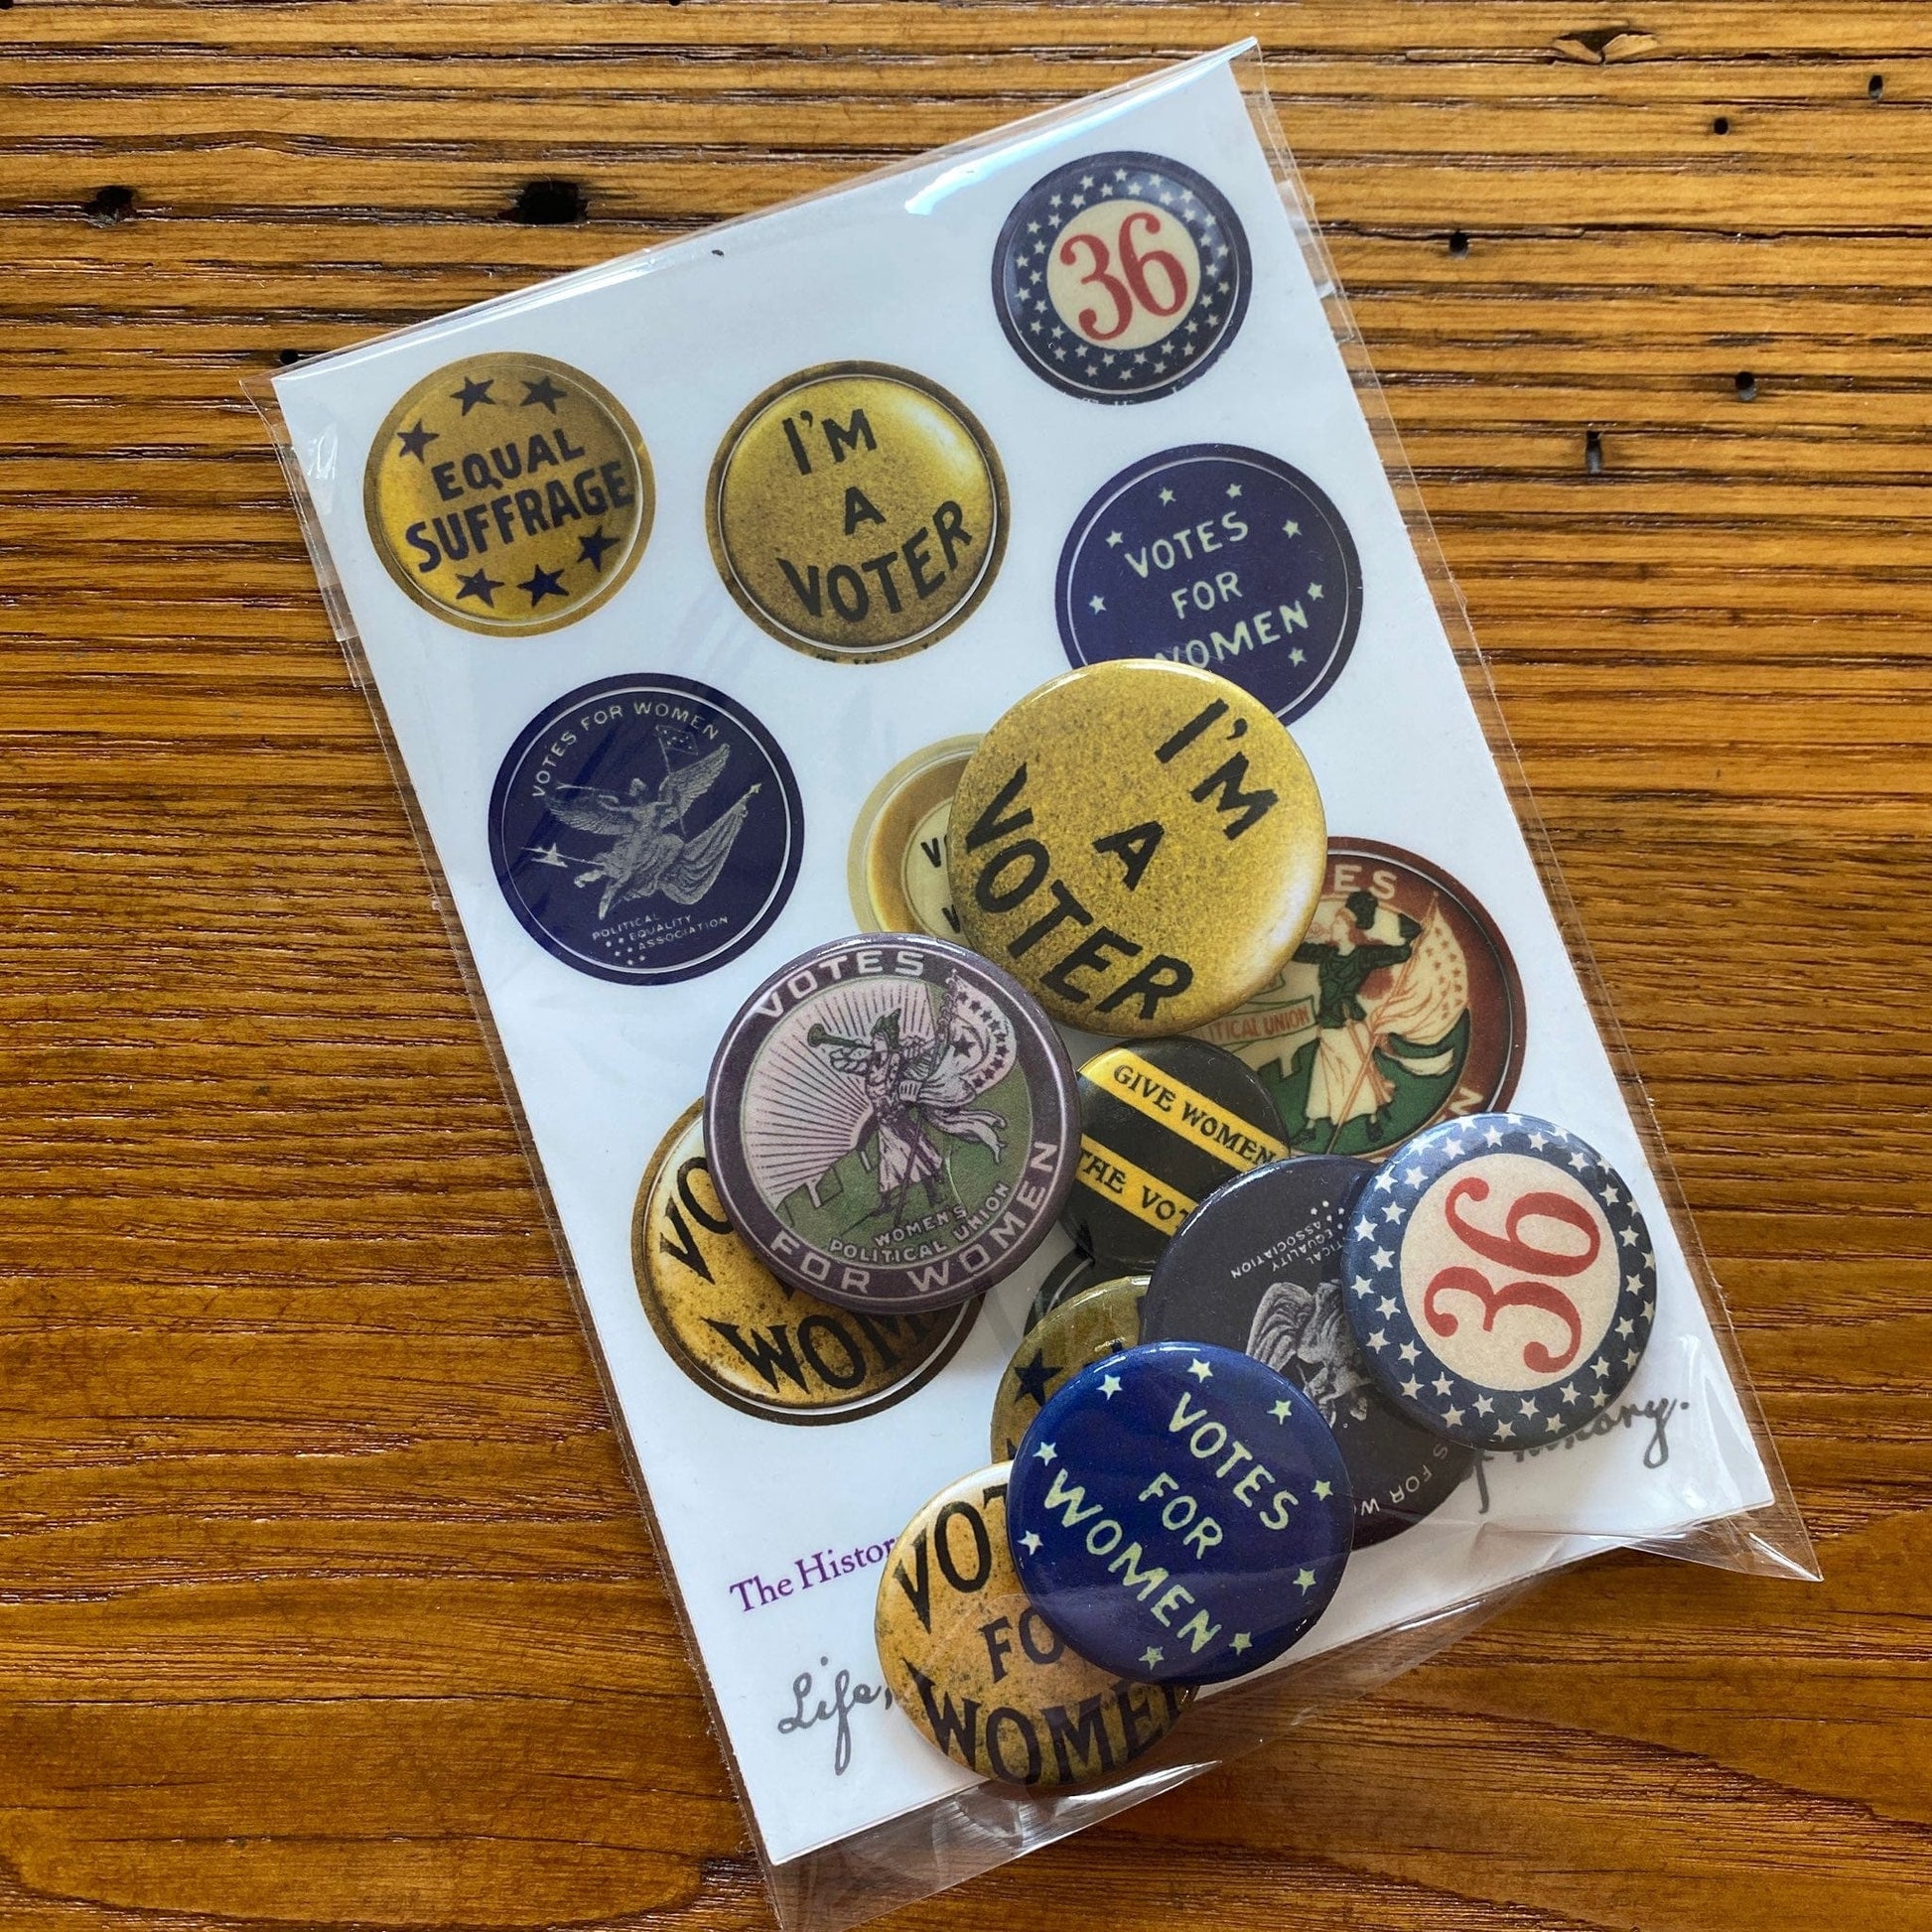 Suffrage Campaign Historical Button Pins and Sticker Sheet Bundle